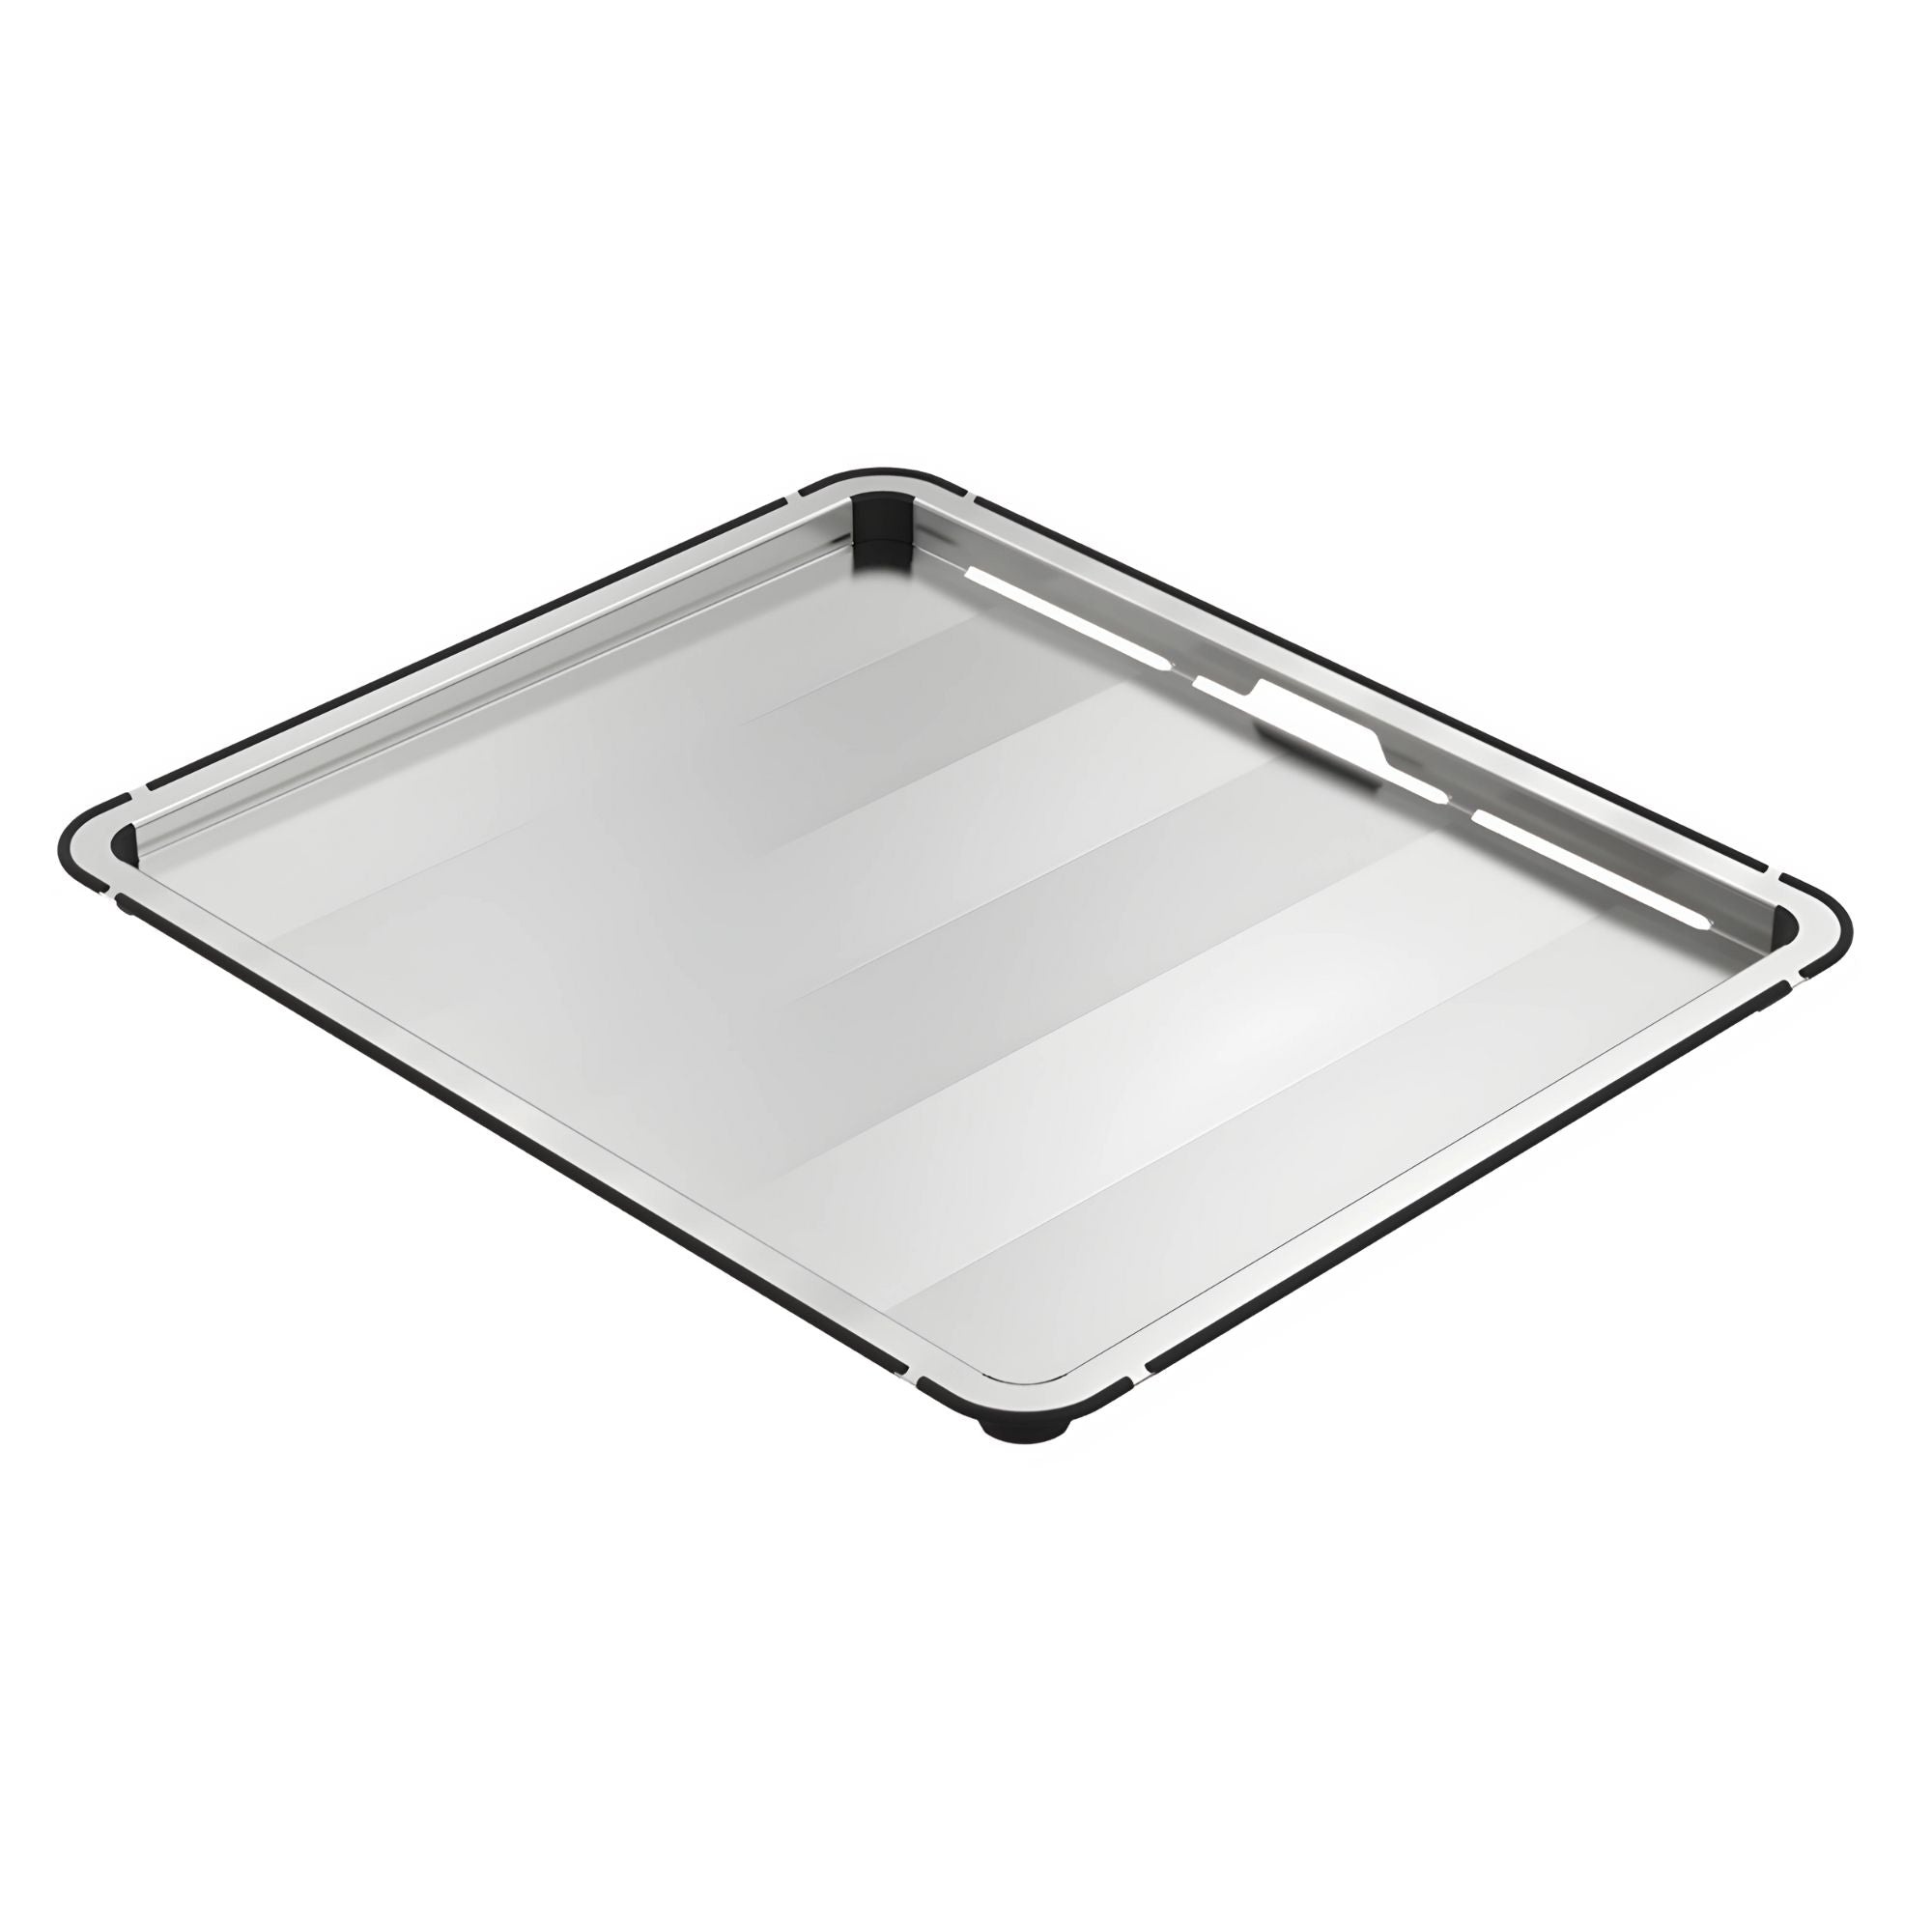 ABEY PIAZZA SQUARE SINGLE BOWL KITCHEN SINK STAINLESS STEEL 770MM